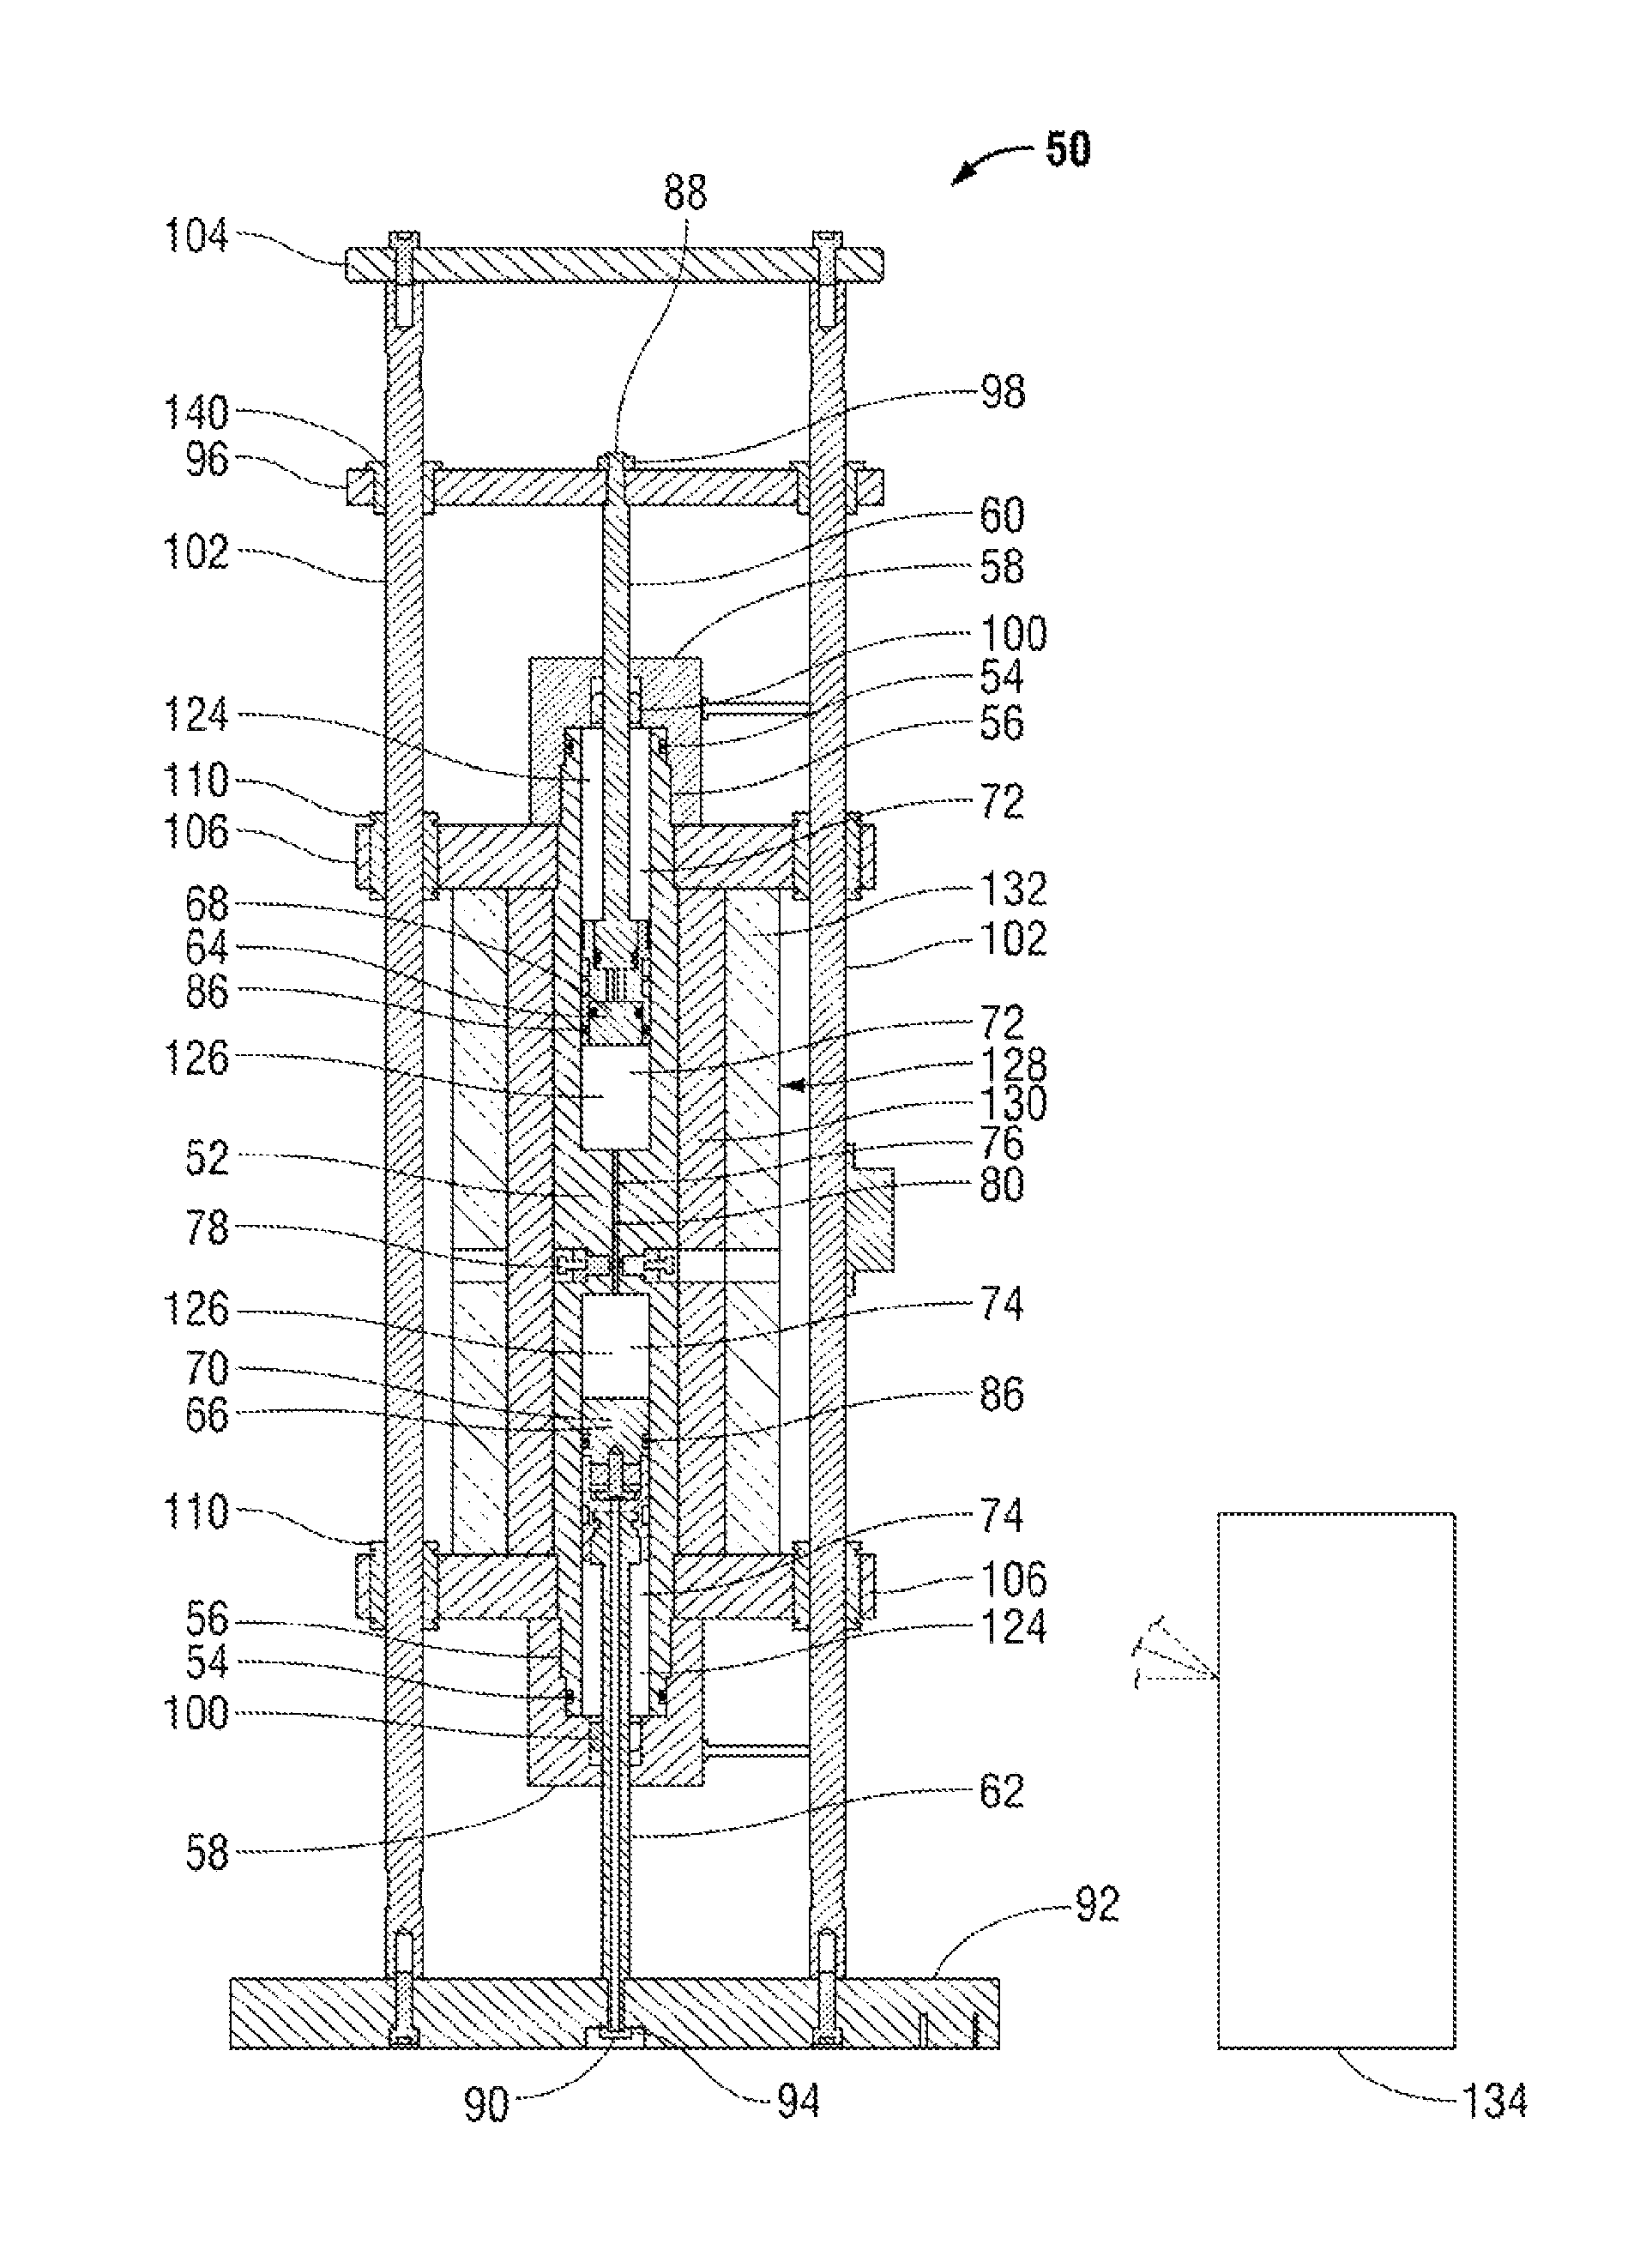 Apparatus and method for phase equilibrium with in-situ sensing